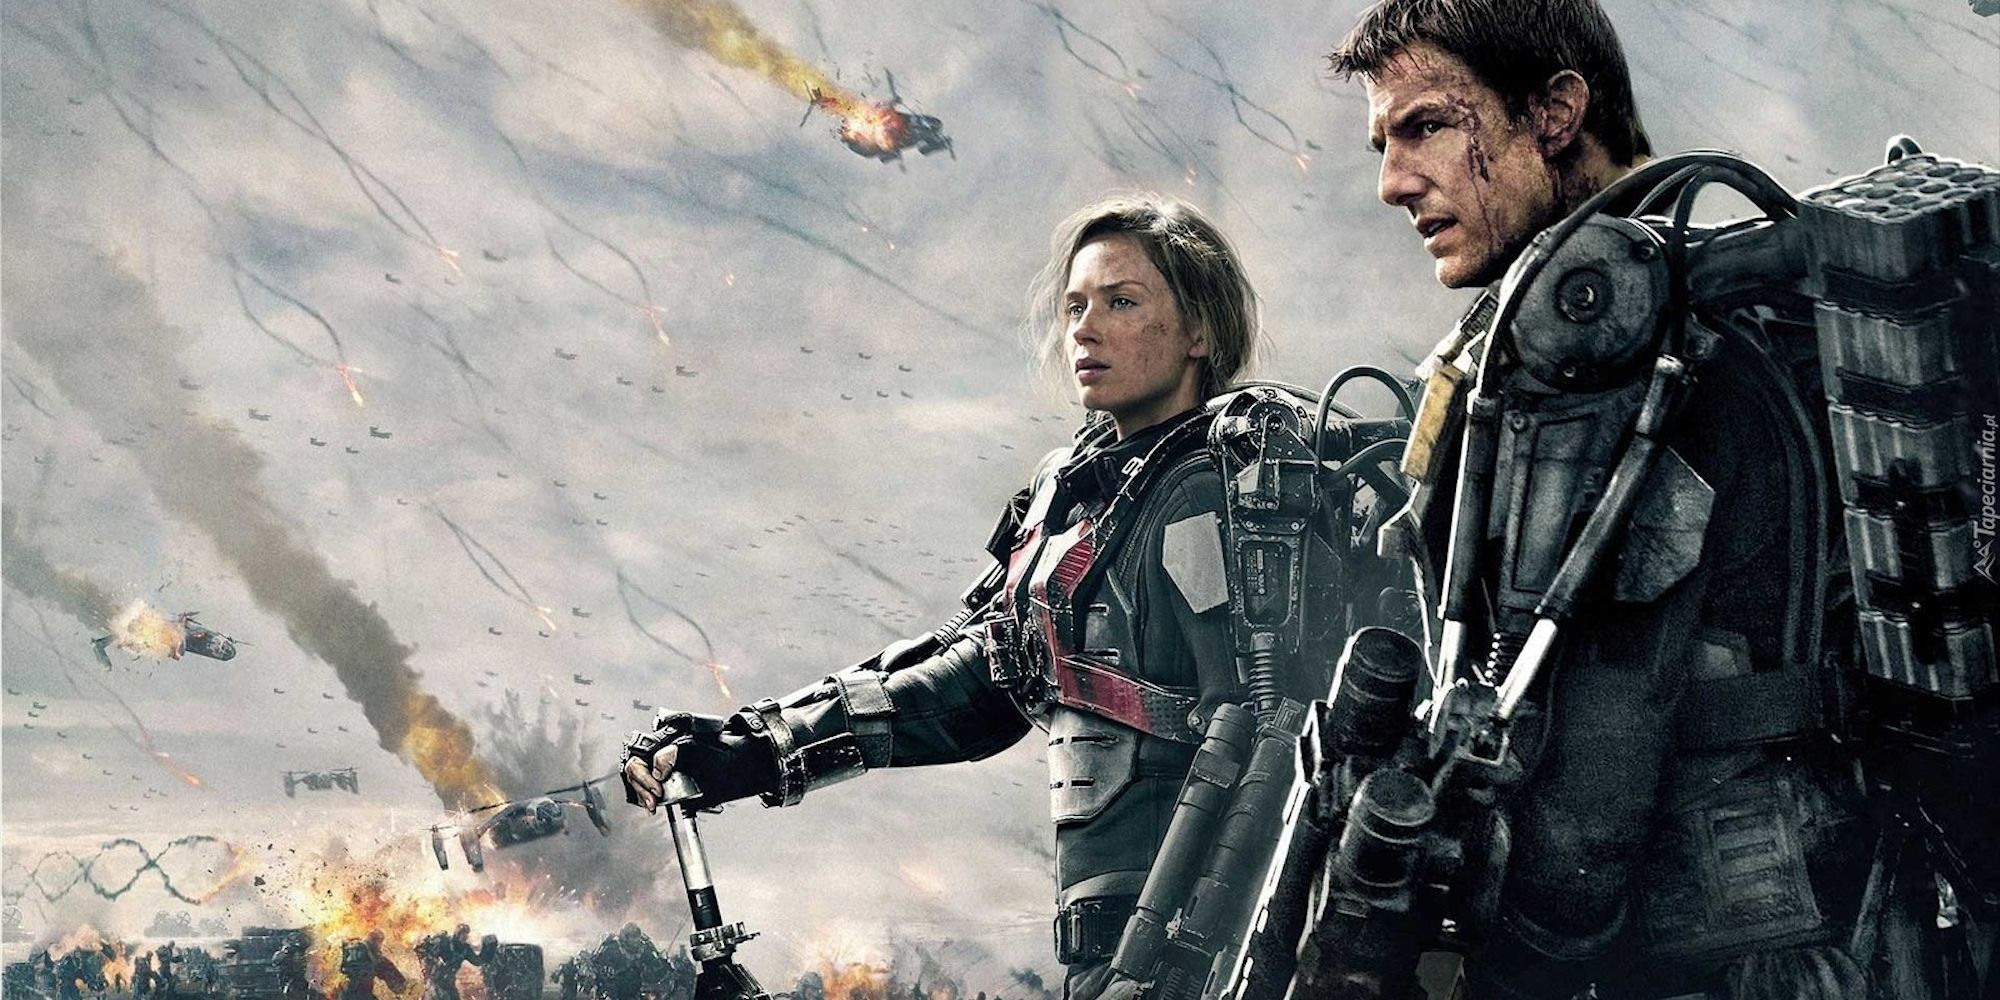 Emily Blunt and Tom Cruise staring into the distance in a poster for Edge of Tomorrow.